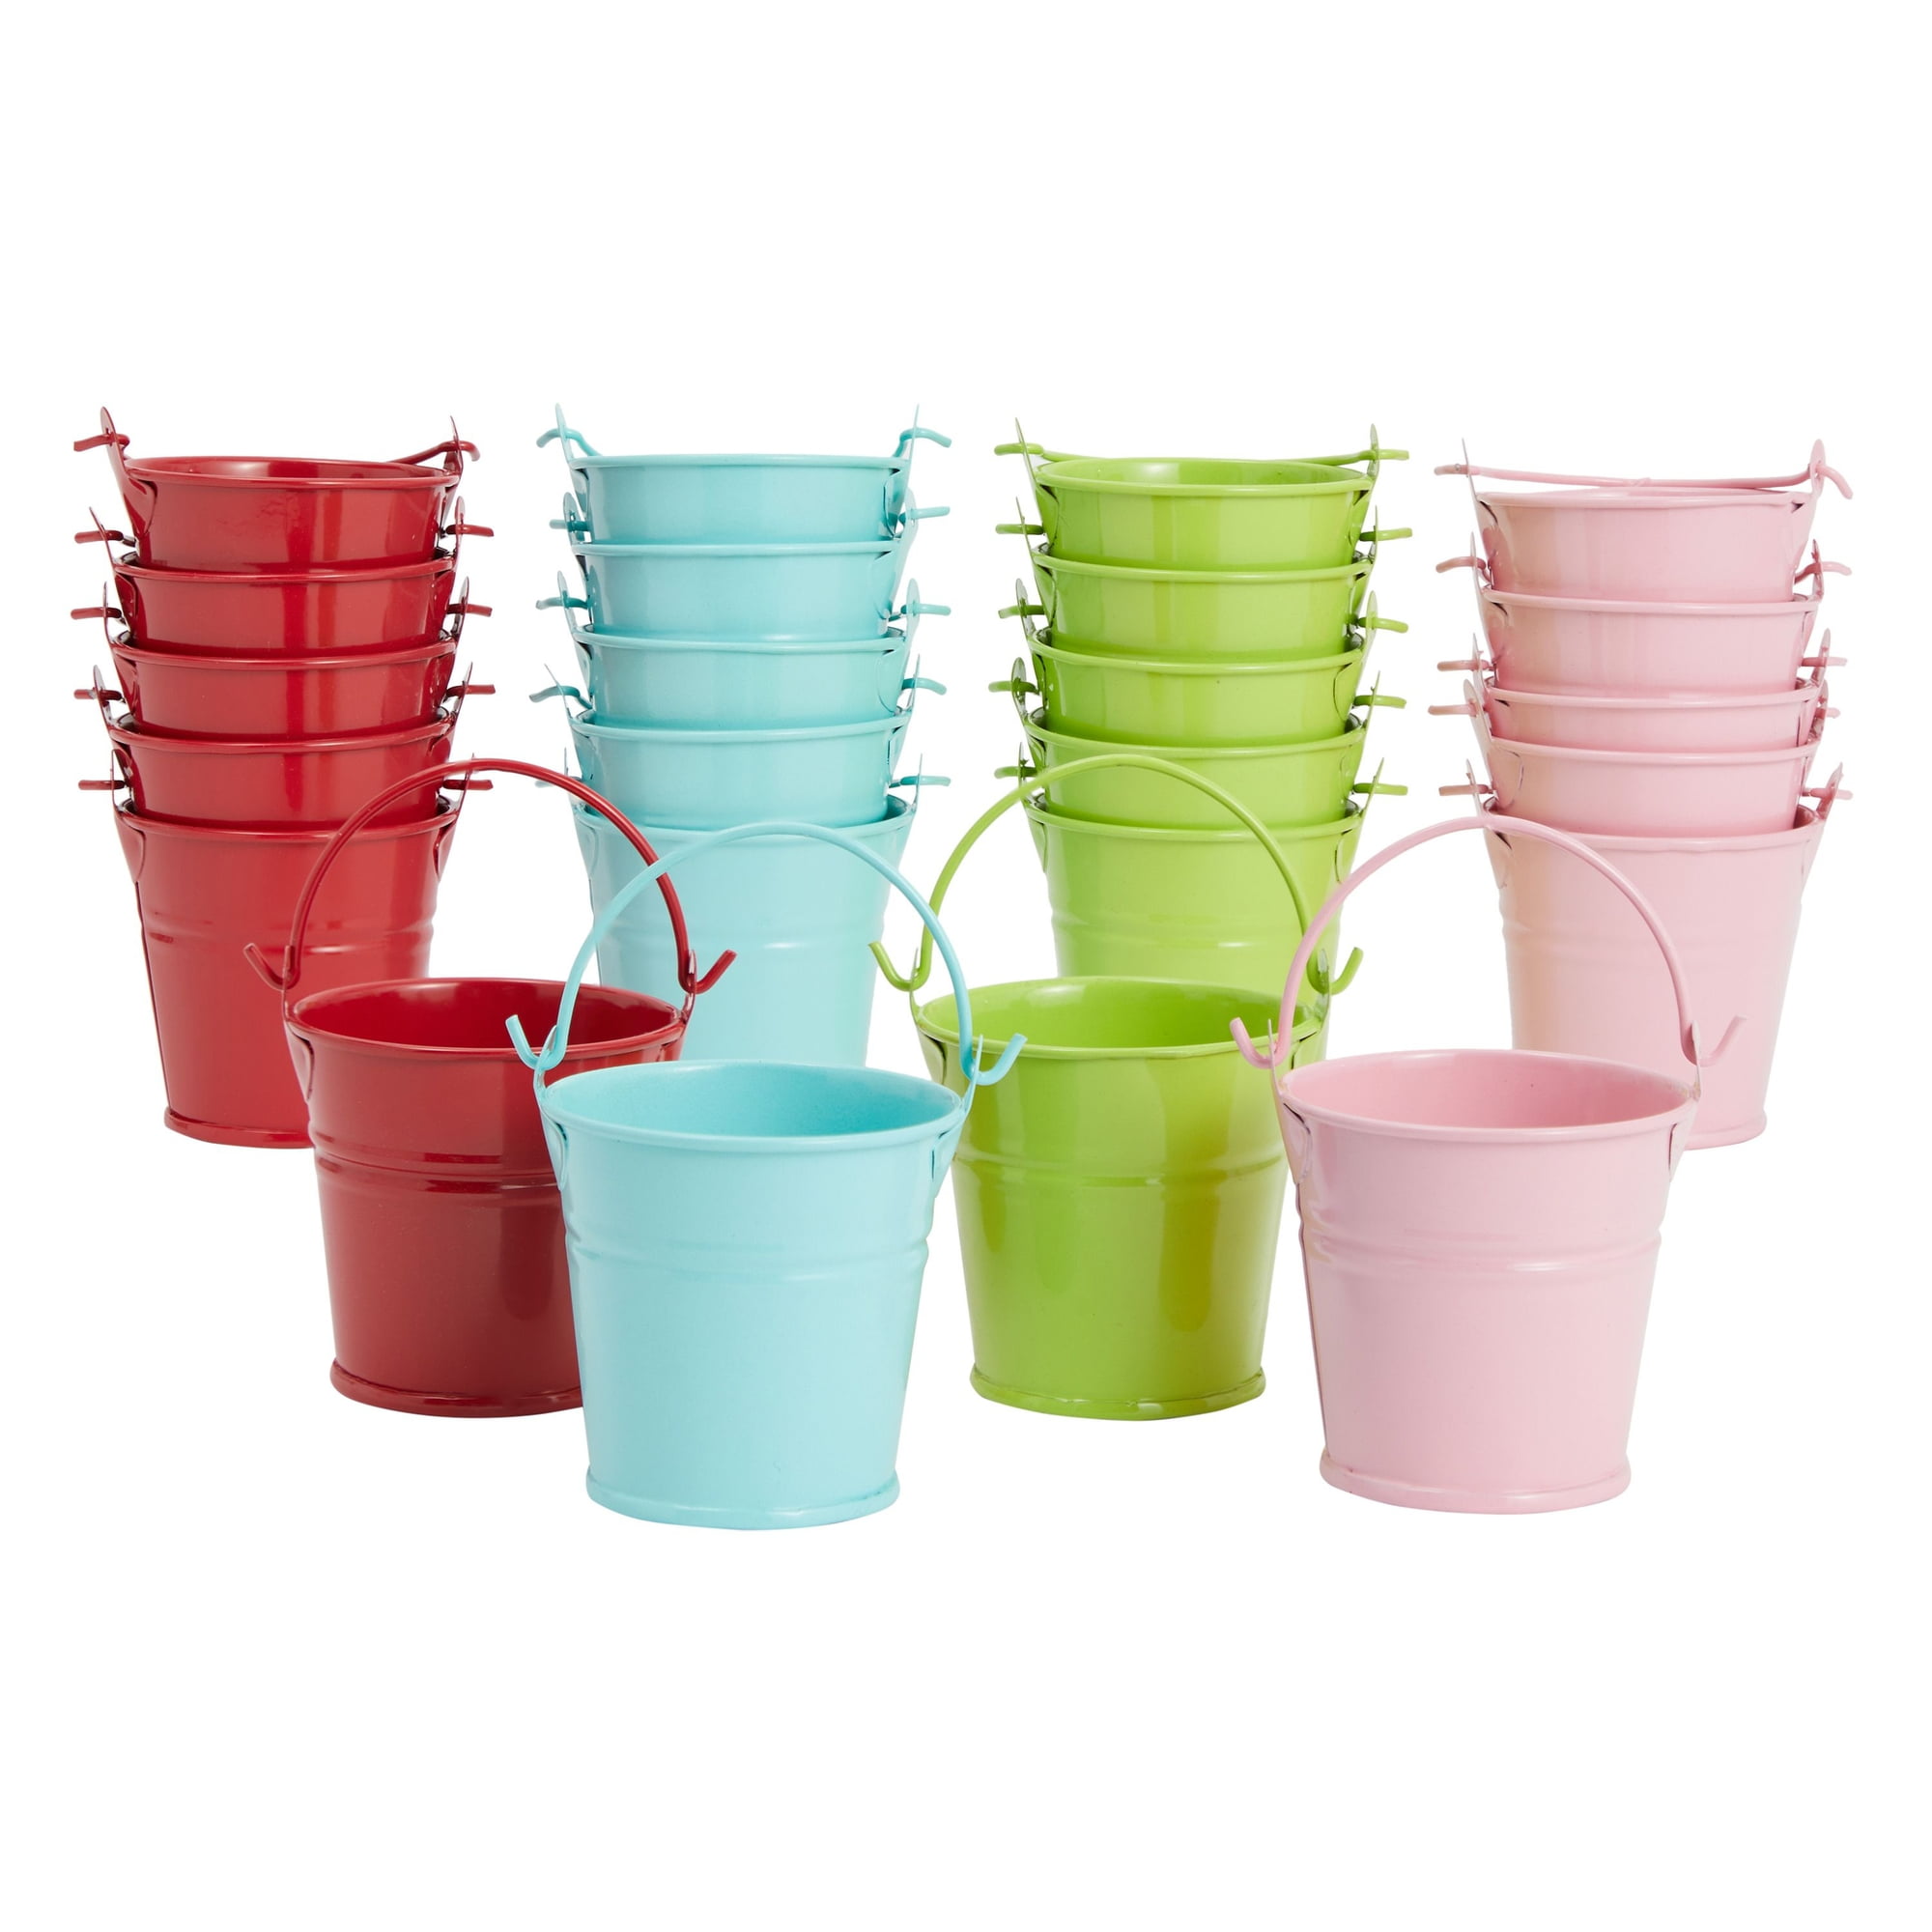 Bokon 24 Pcs Metal Bucket 7 x 5 x 6.5 Inch Small Bucket with Handle  Colorful Mini Buckets Party Favor Small Ice Bucket for Kids Toy Container  Candy Snack Crafts Flower Pot Plant Party Decoration